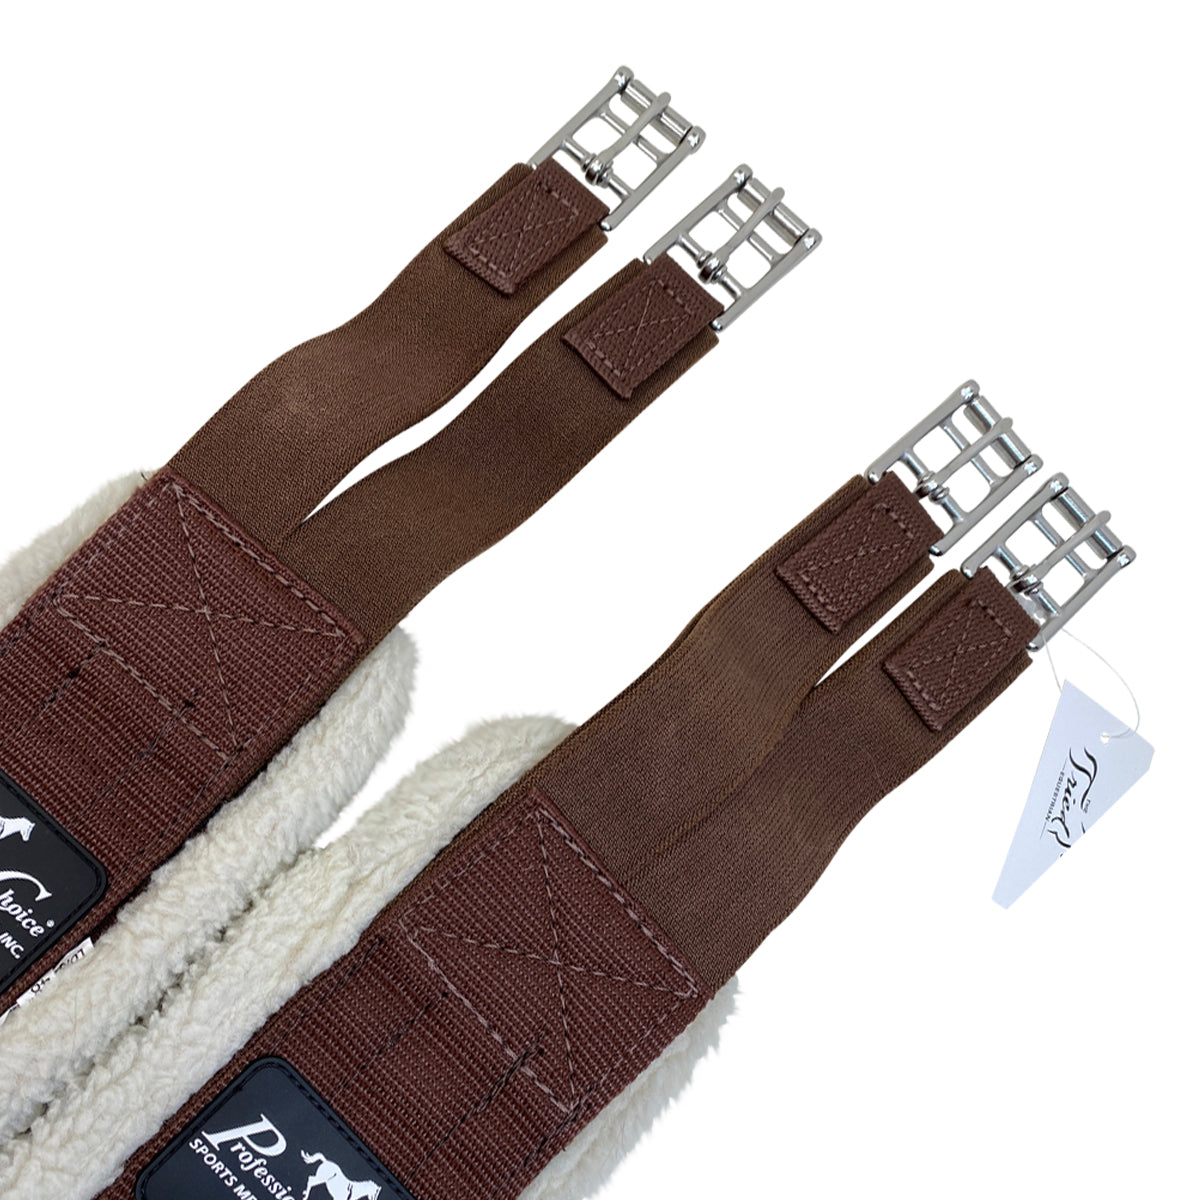 Professional's Choice SMx Fleece Girth in Brown